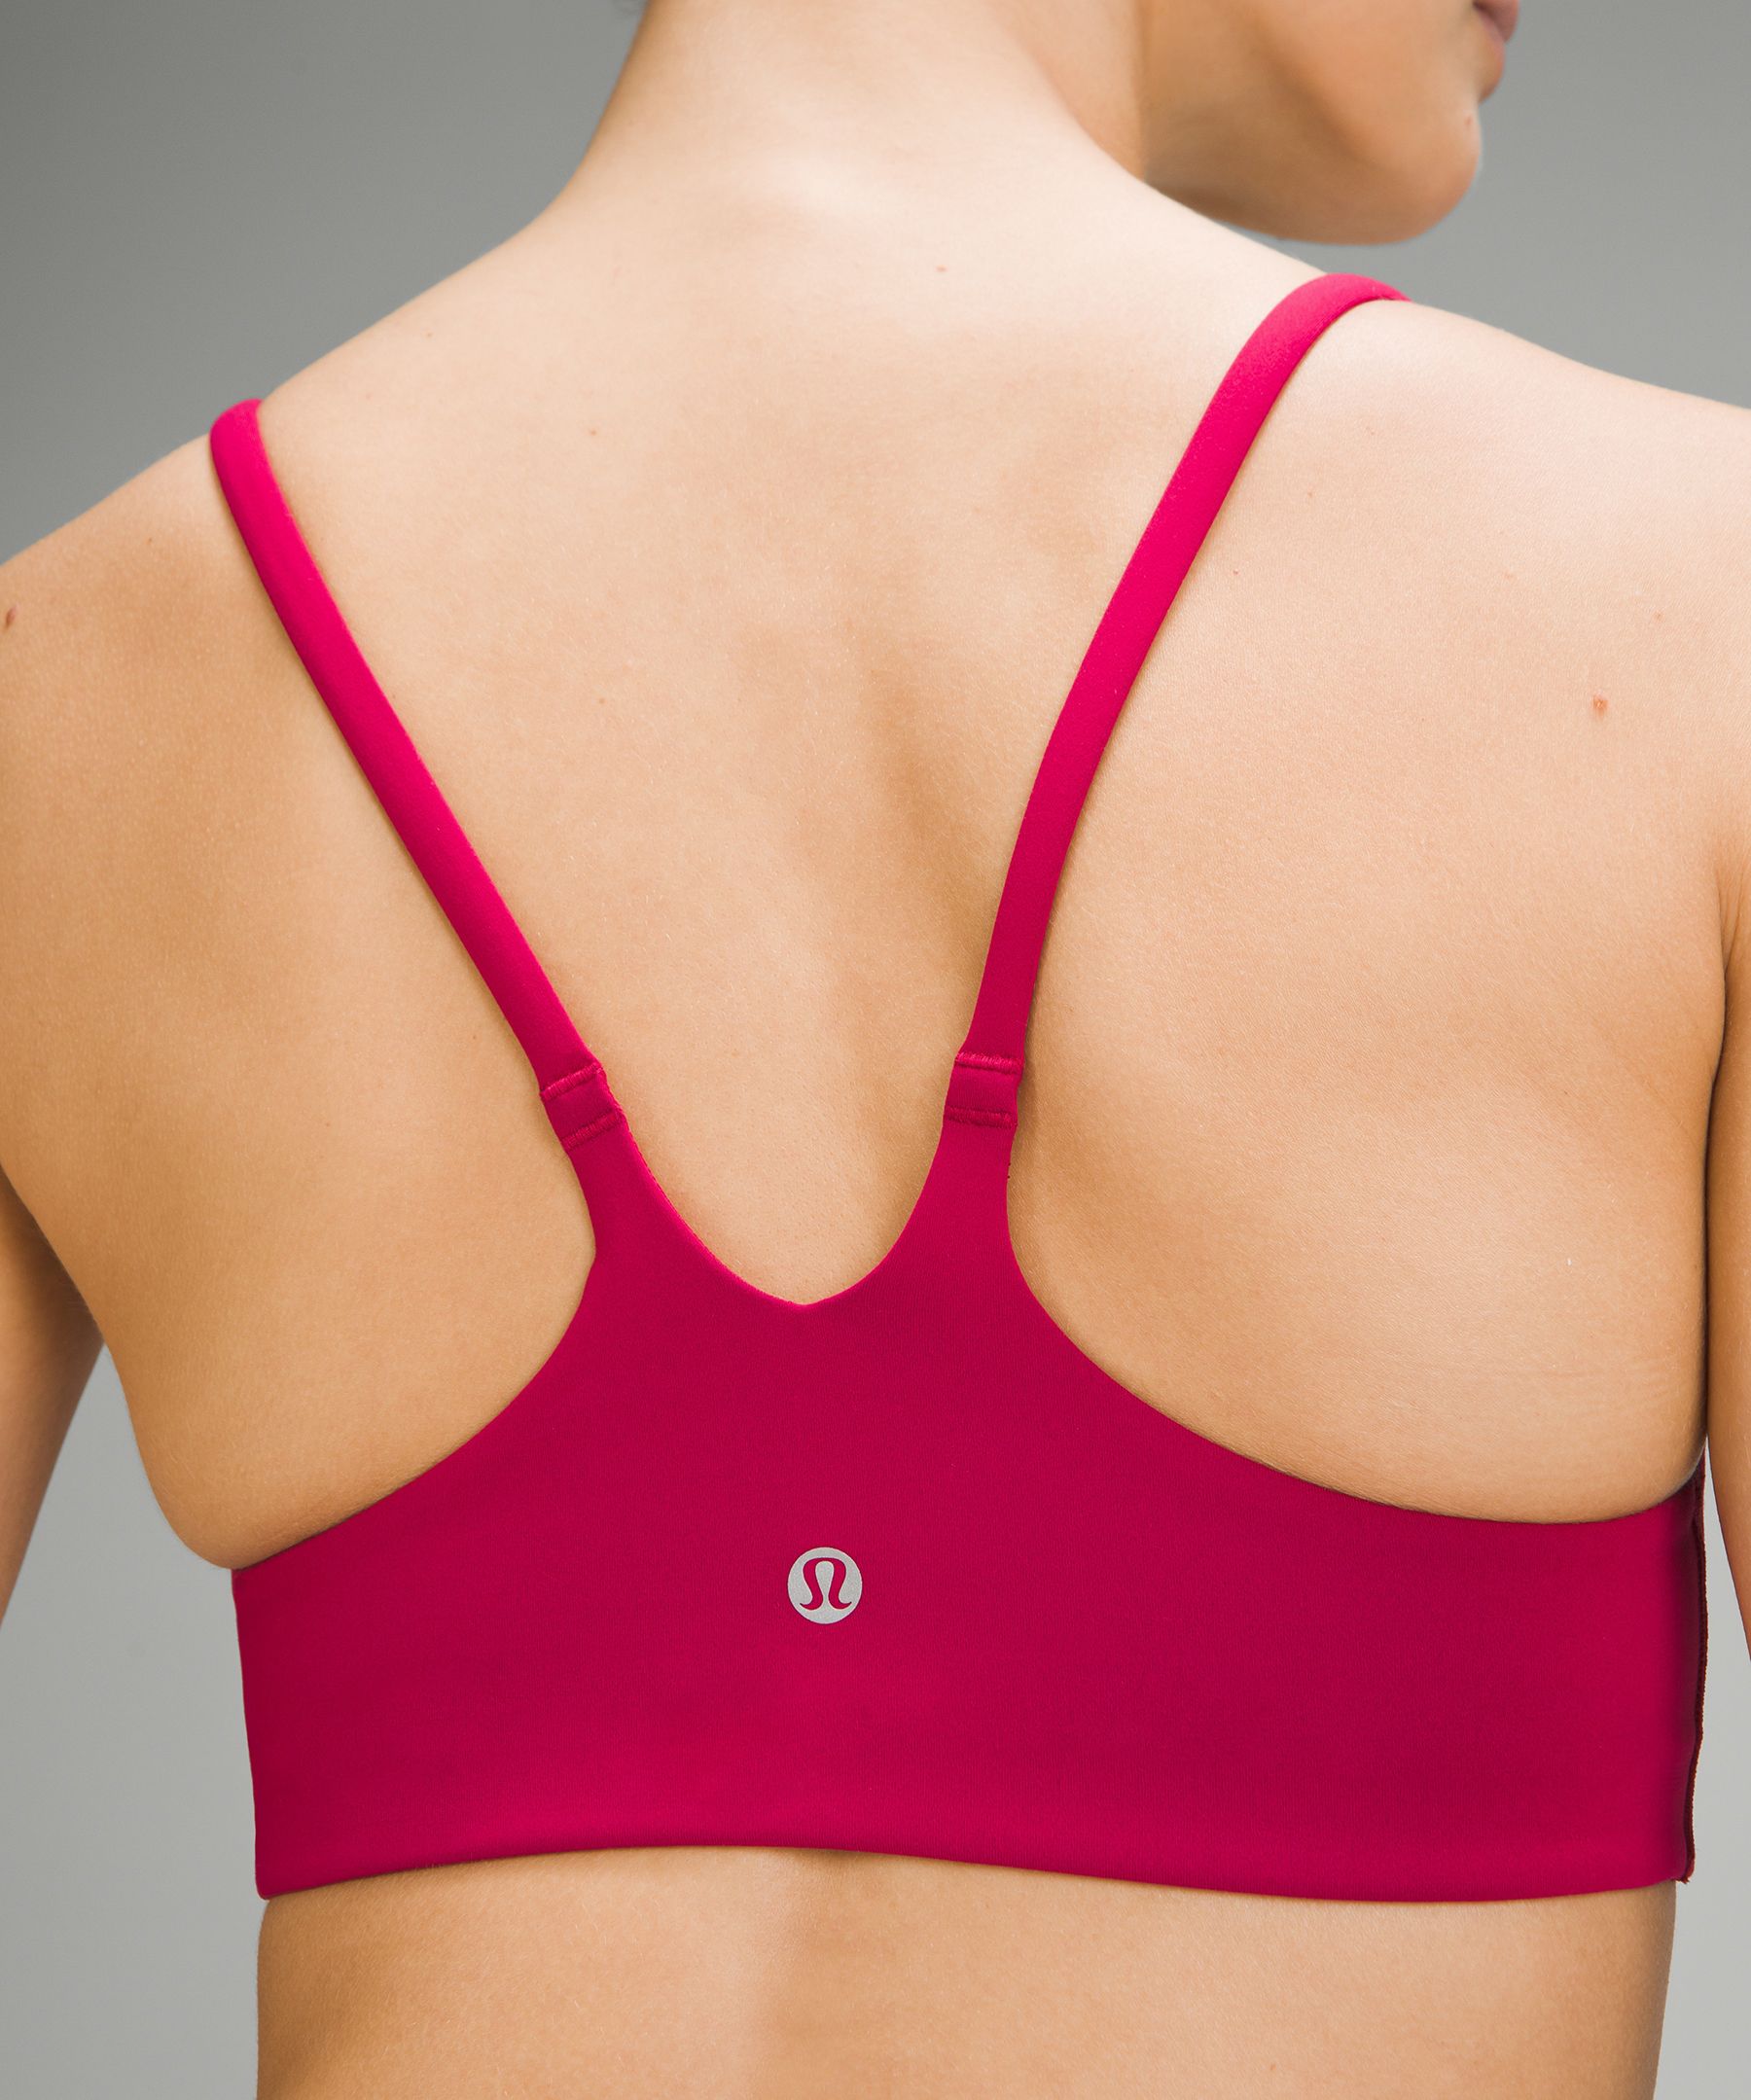 Wunder Train Strappy Racer Bra *Light Support, A/B Cup | Women's Bras